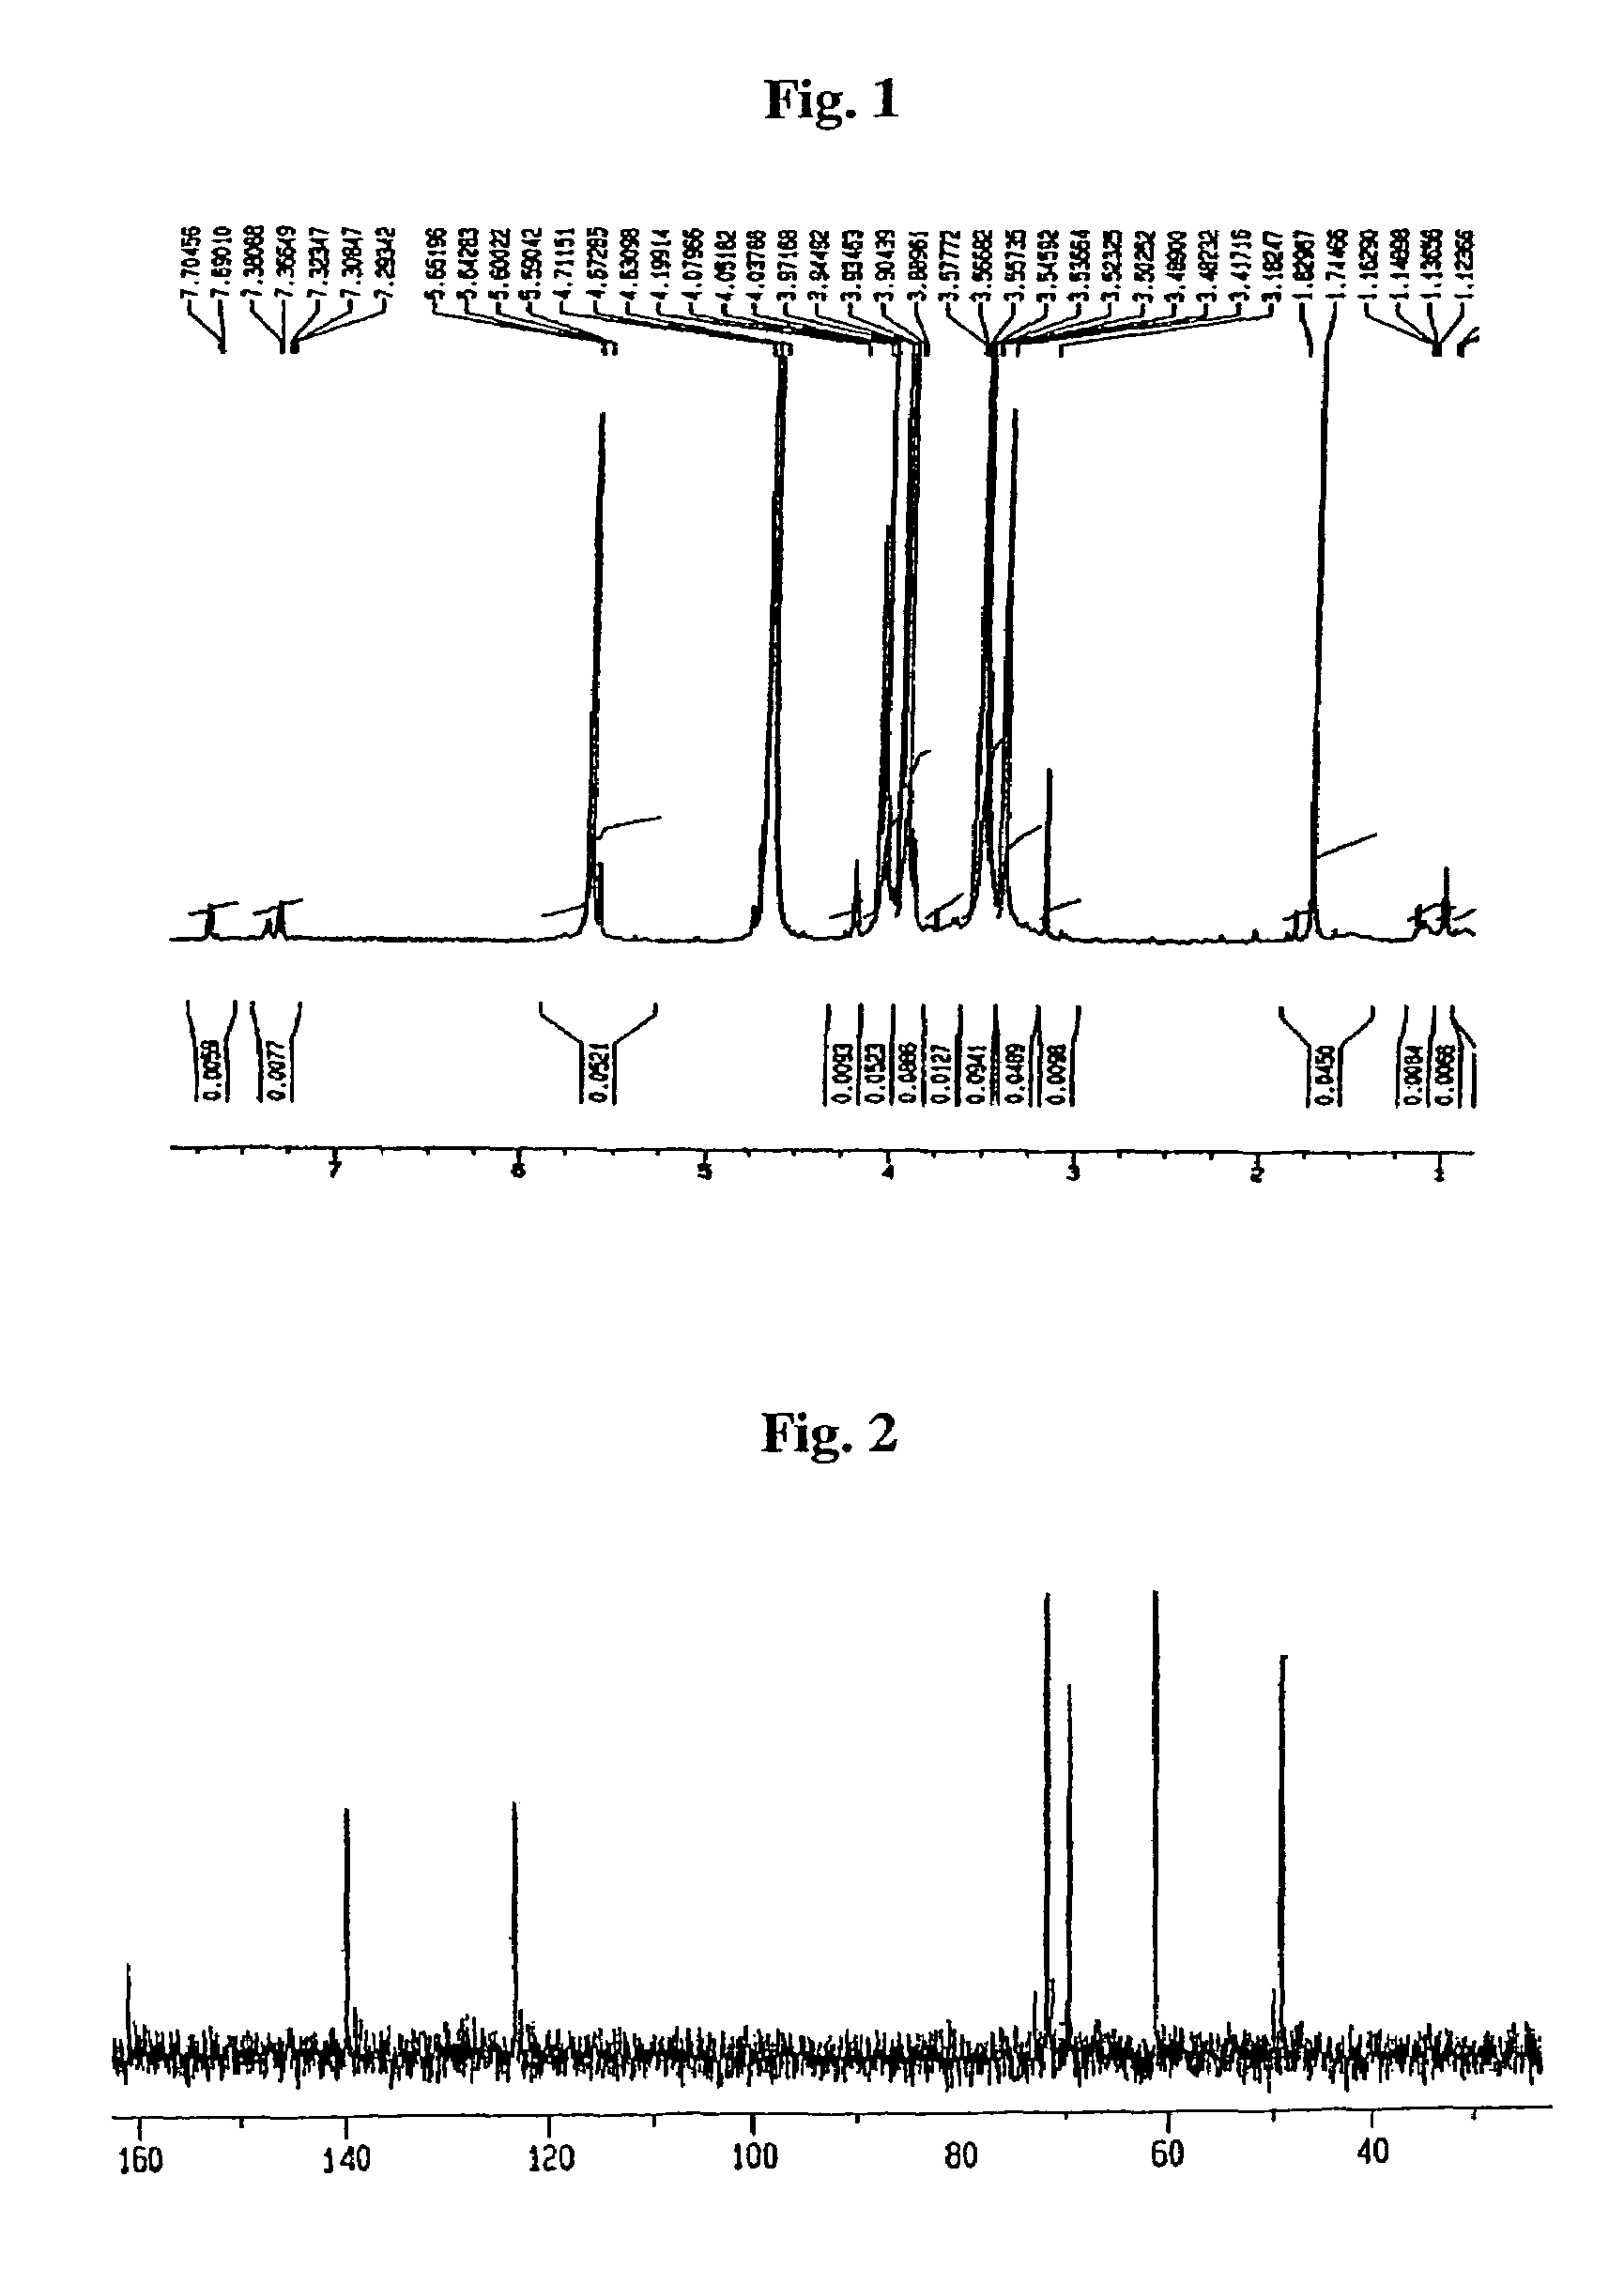 Preparation method of valienamine from acarbose and/or acarbose derivatives using trifluoroacetic acid